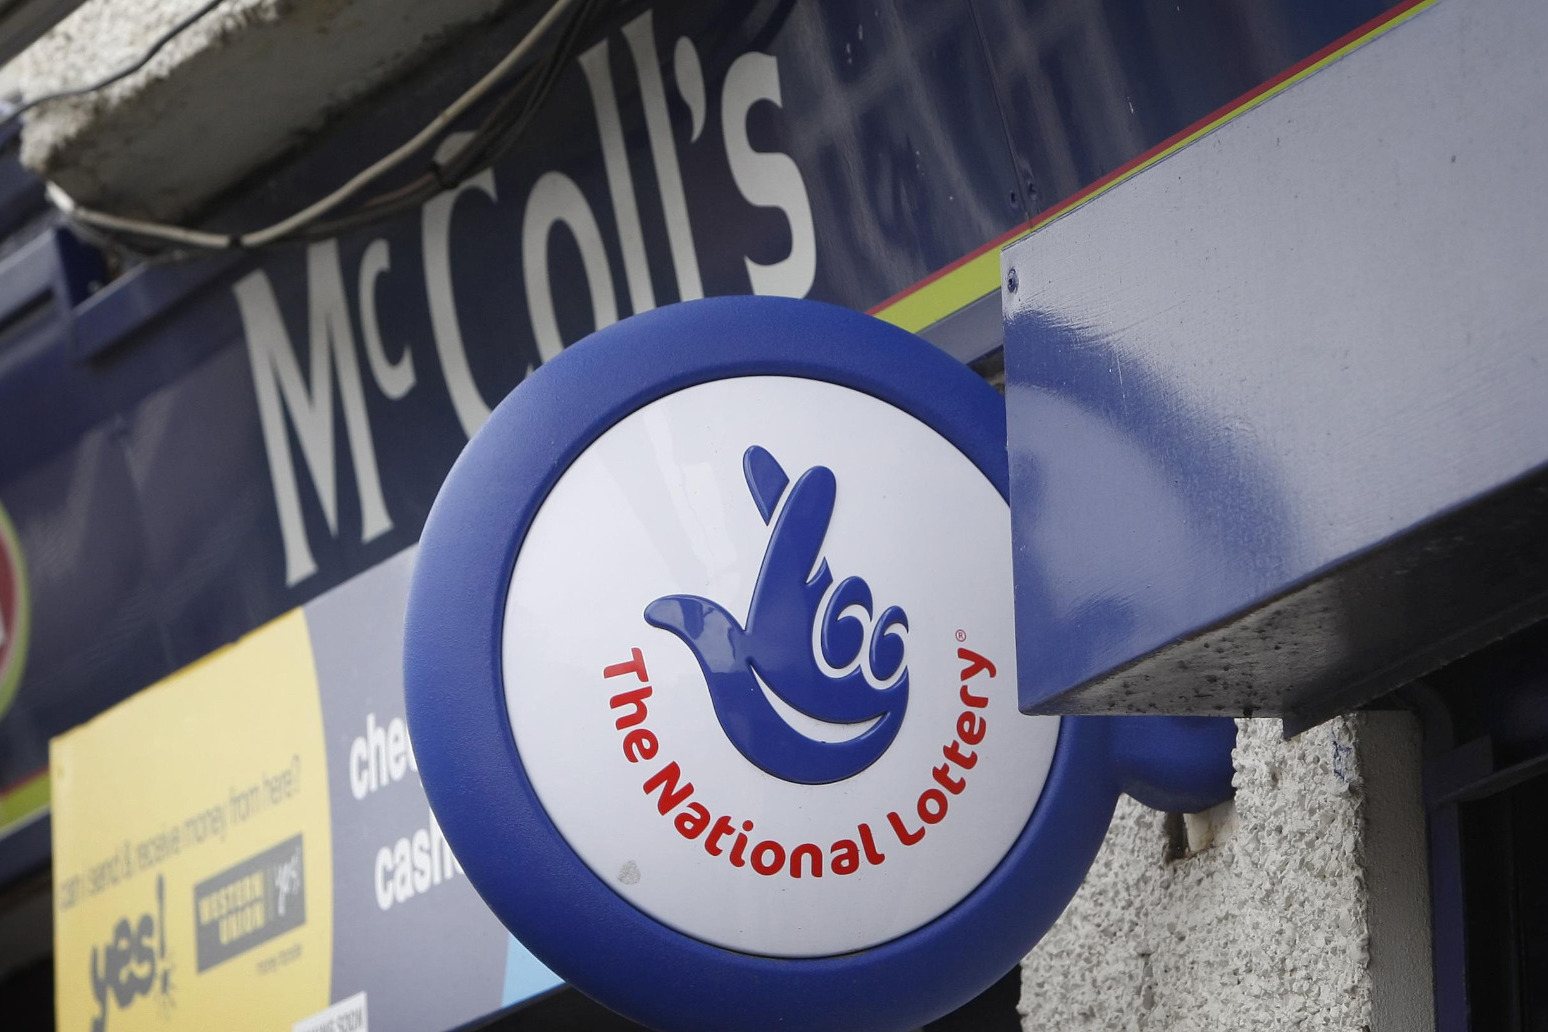 McColl’s boss quits amid battle to secure chain’s future 